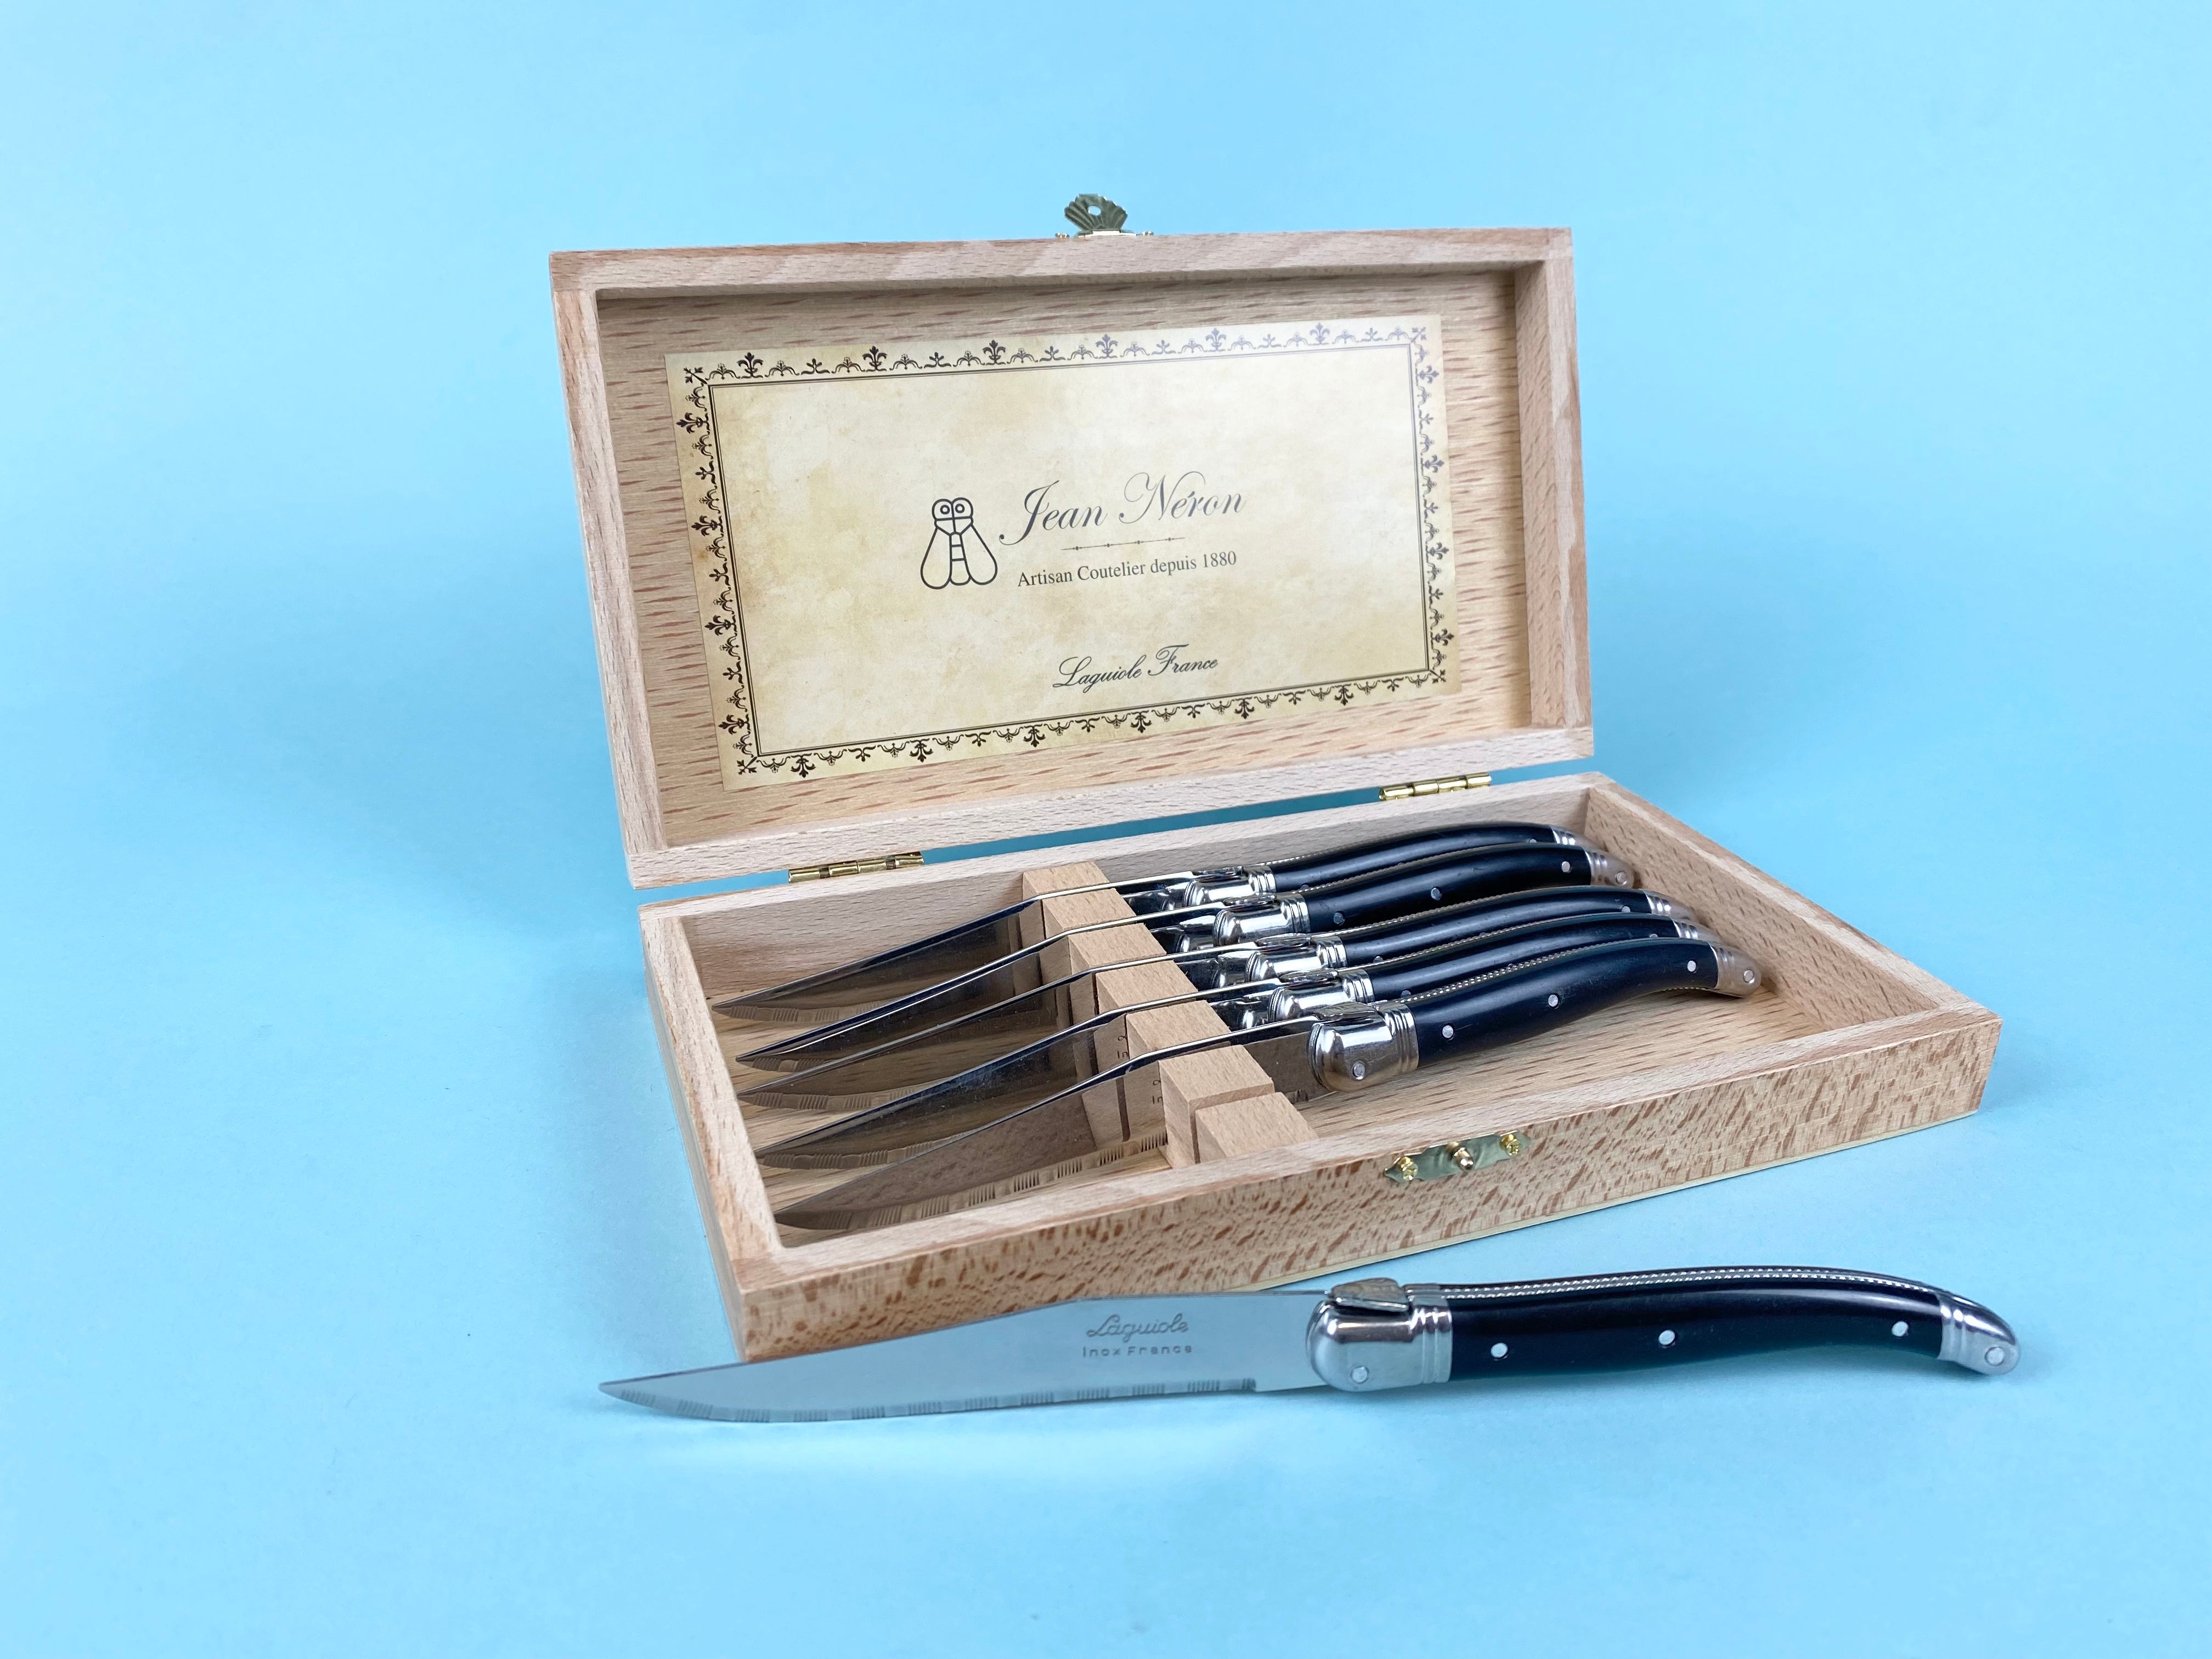 Laguiole Black Platine Knives in Presentation Box (Set of 6) Cutlery Laguiole Brand_Laguiole Kitchen_Dinnerware Kitchen_Kitchenware Knife Sets Laguiole Spring Collection PhotoJul27_104027AM